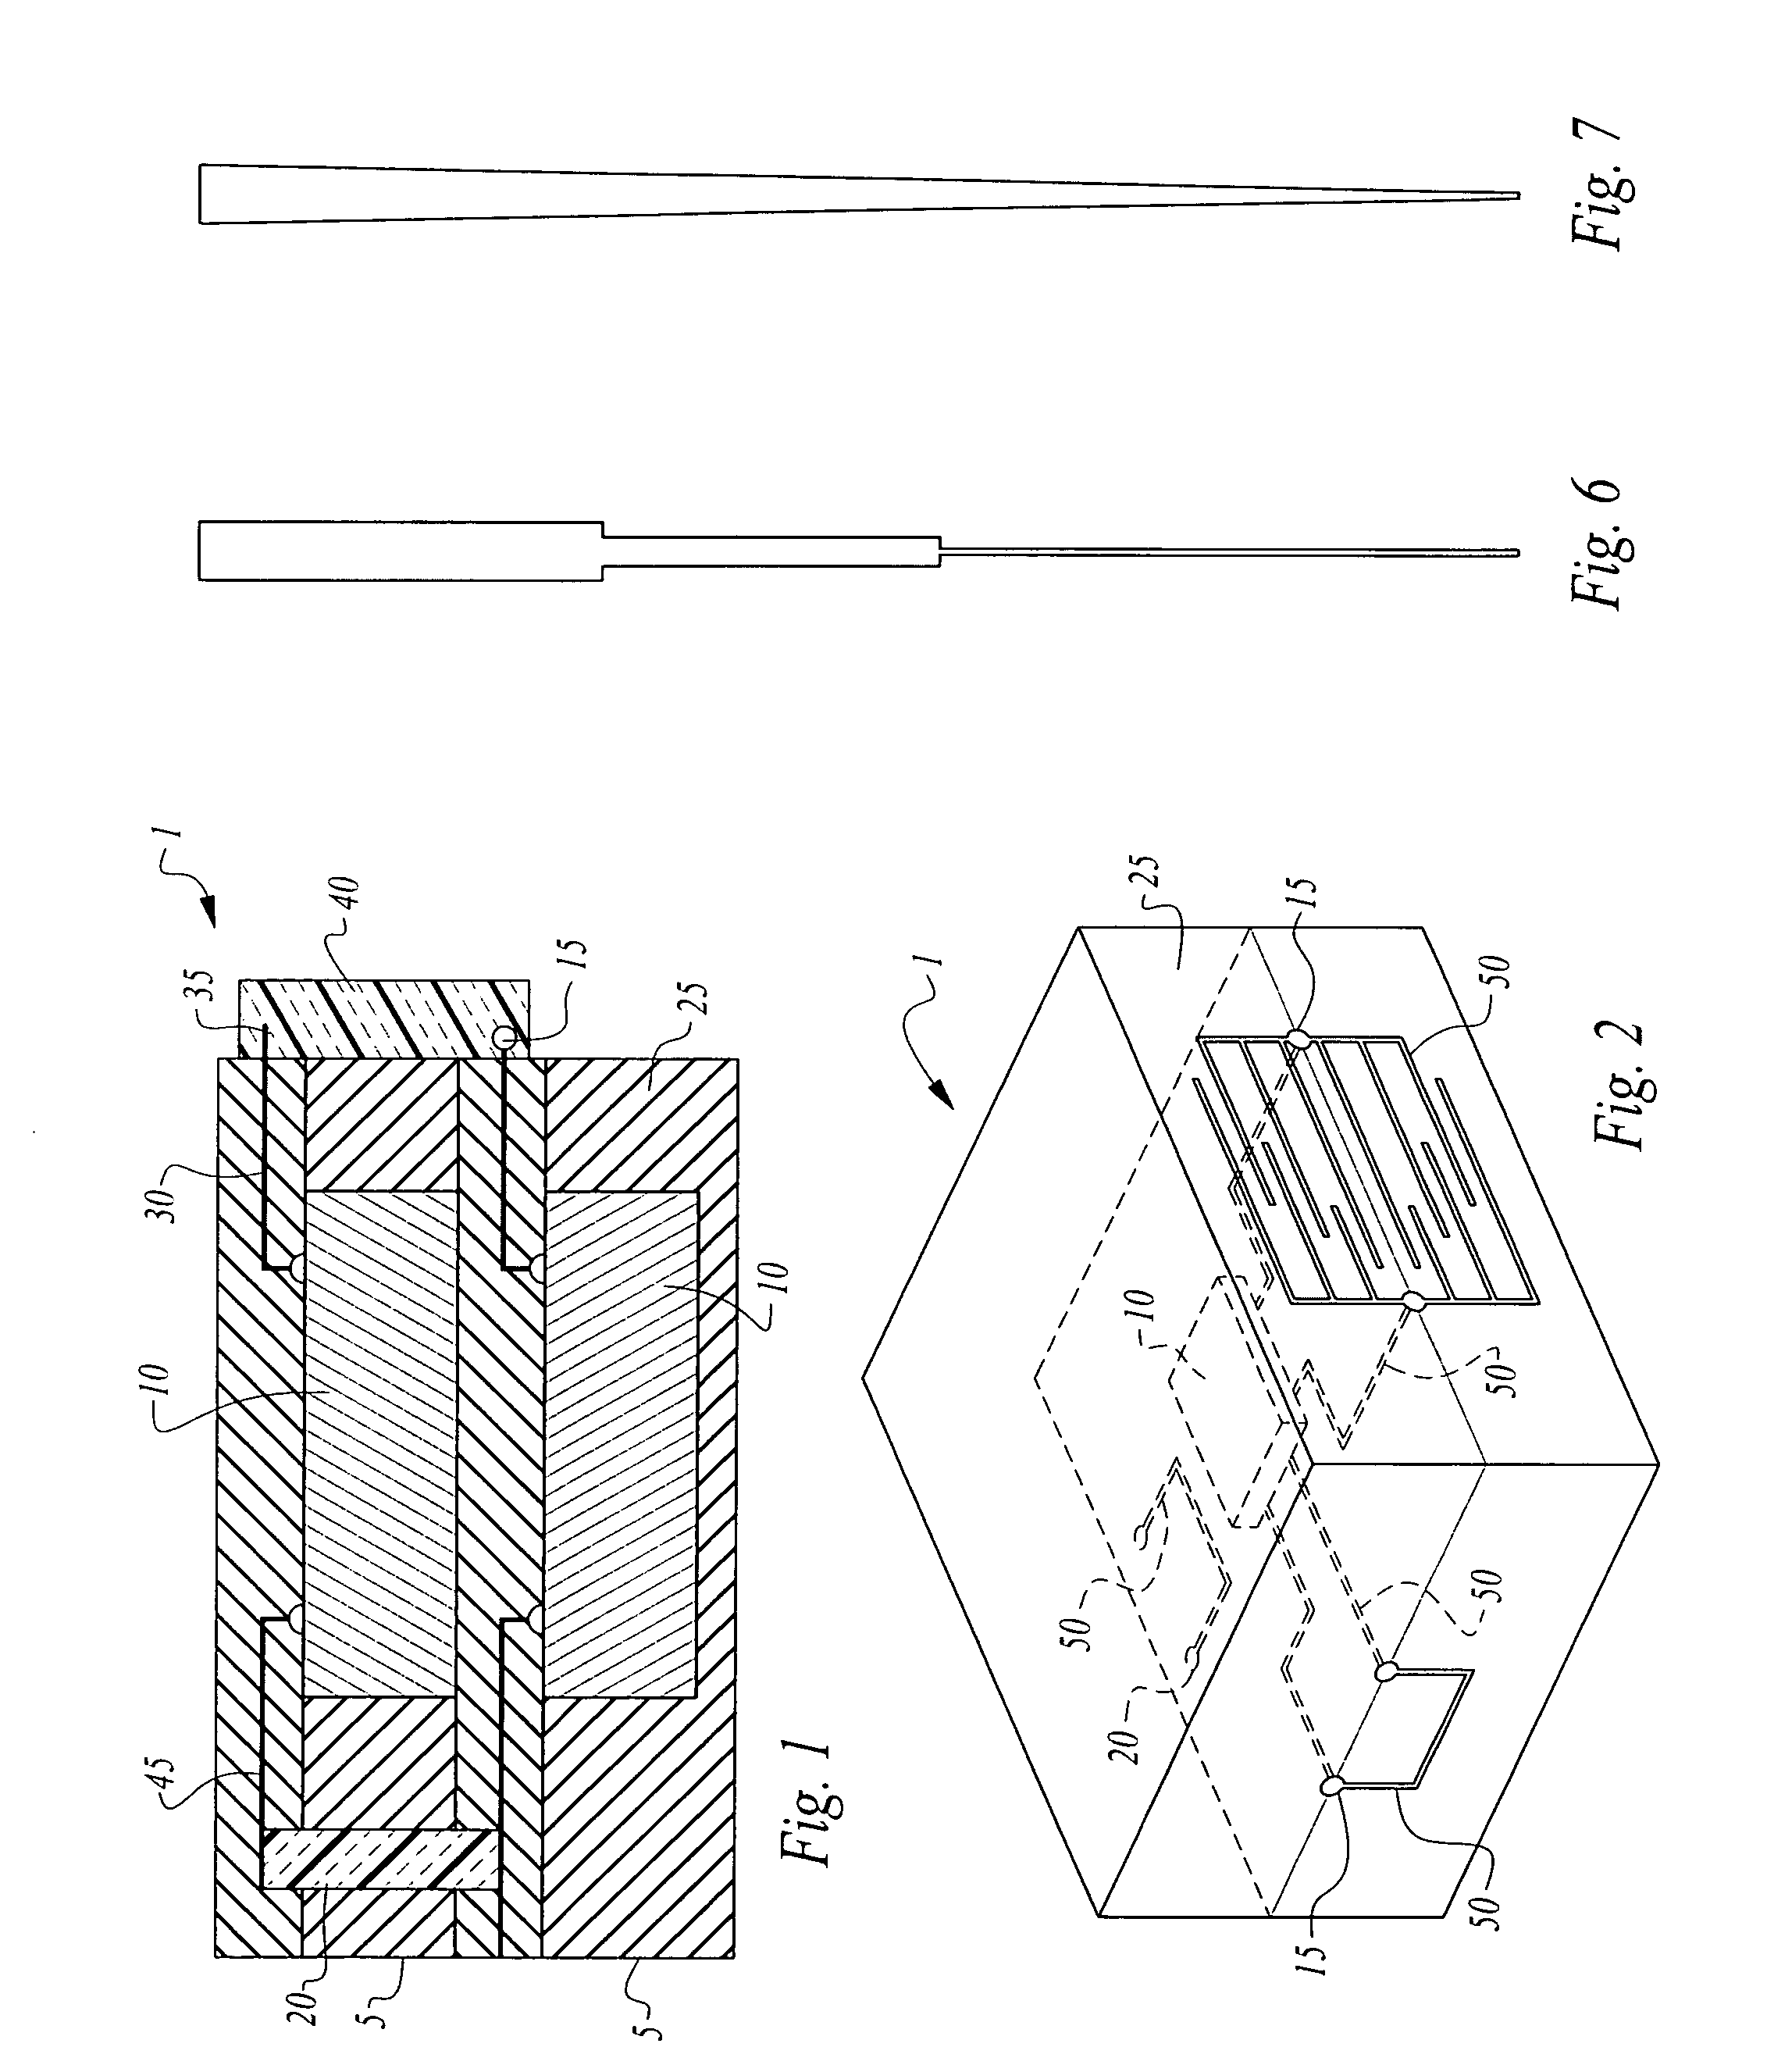 Tamper-resistant electronic circuit and module incorporating electrically conductive nano-structures